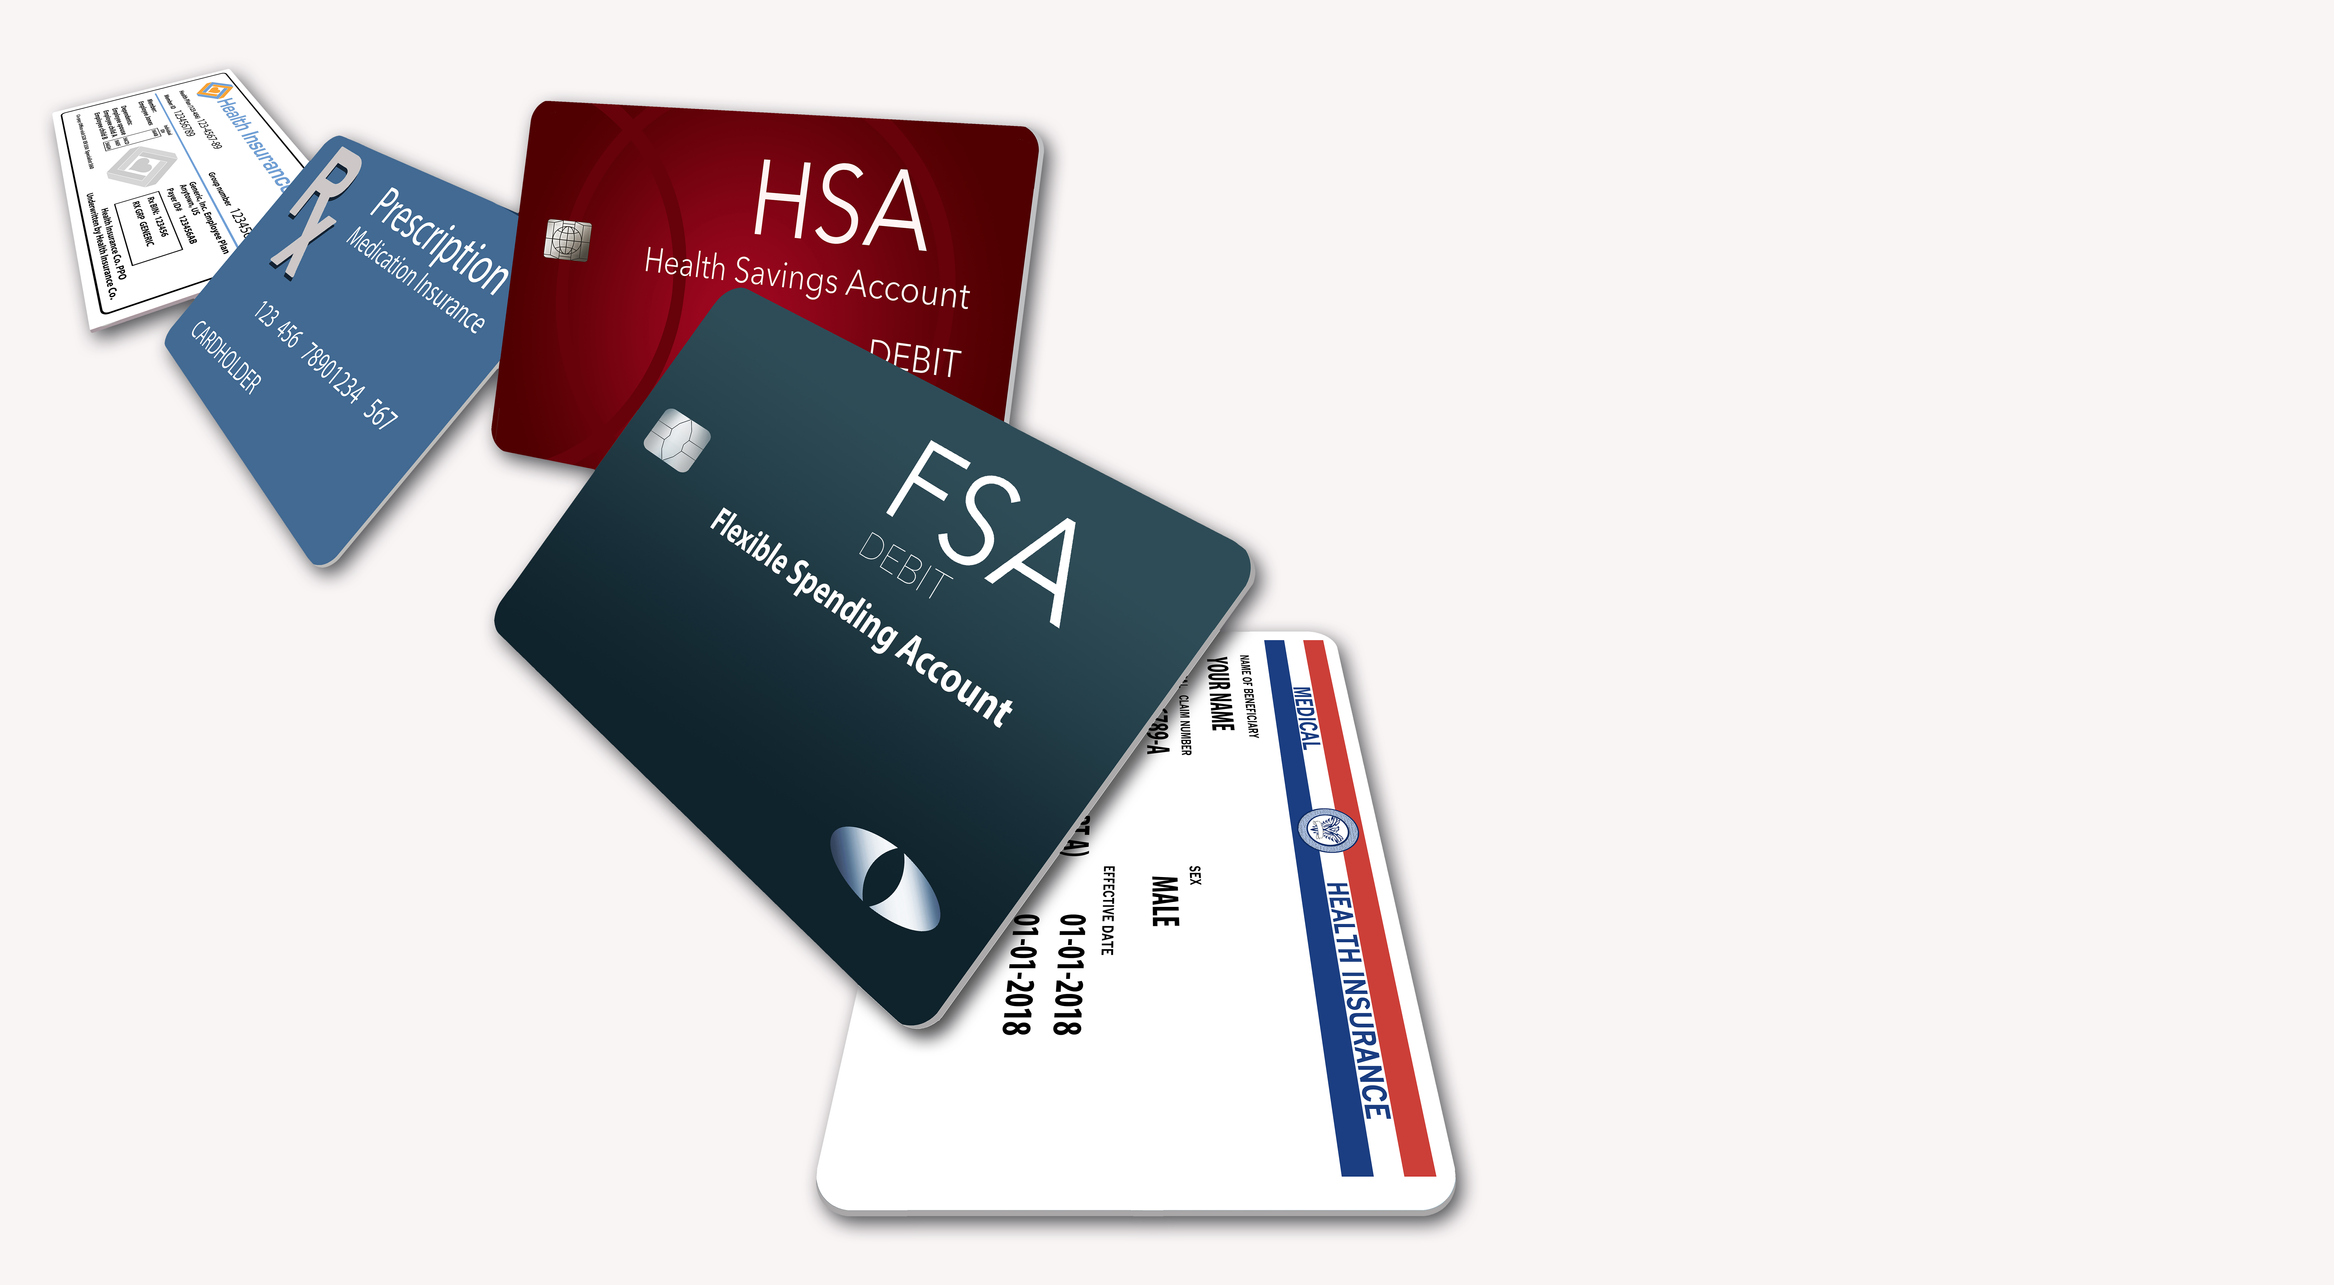 HSA/FSA Eligible Items, What Can I Buy With HSA?